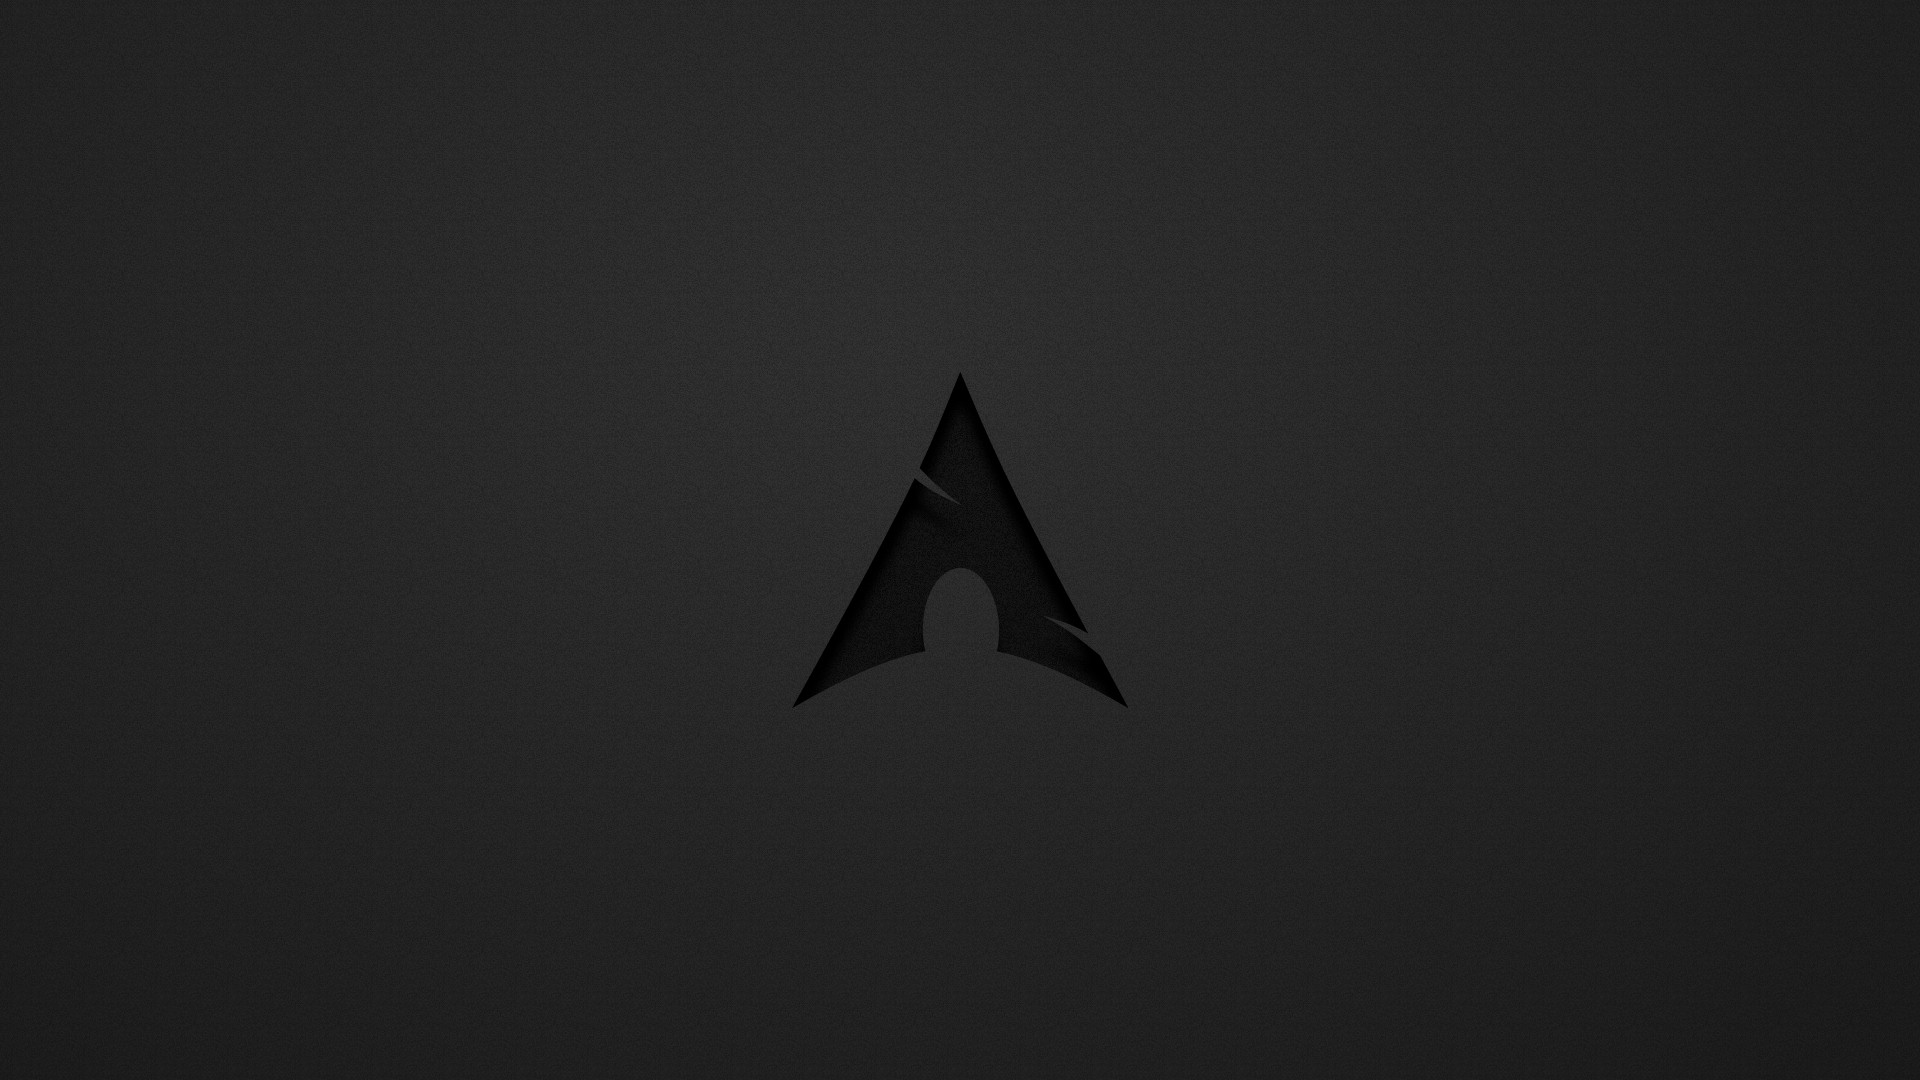 arch linux wallpaper hd,black,triangle,darkness,sky,black and white